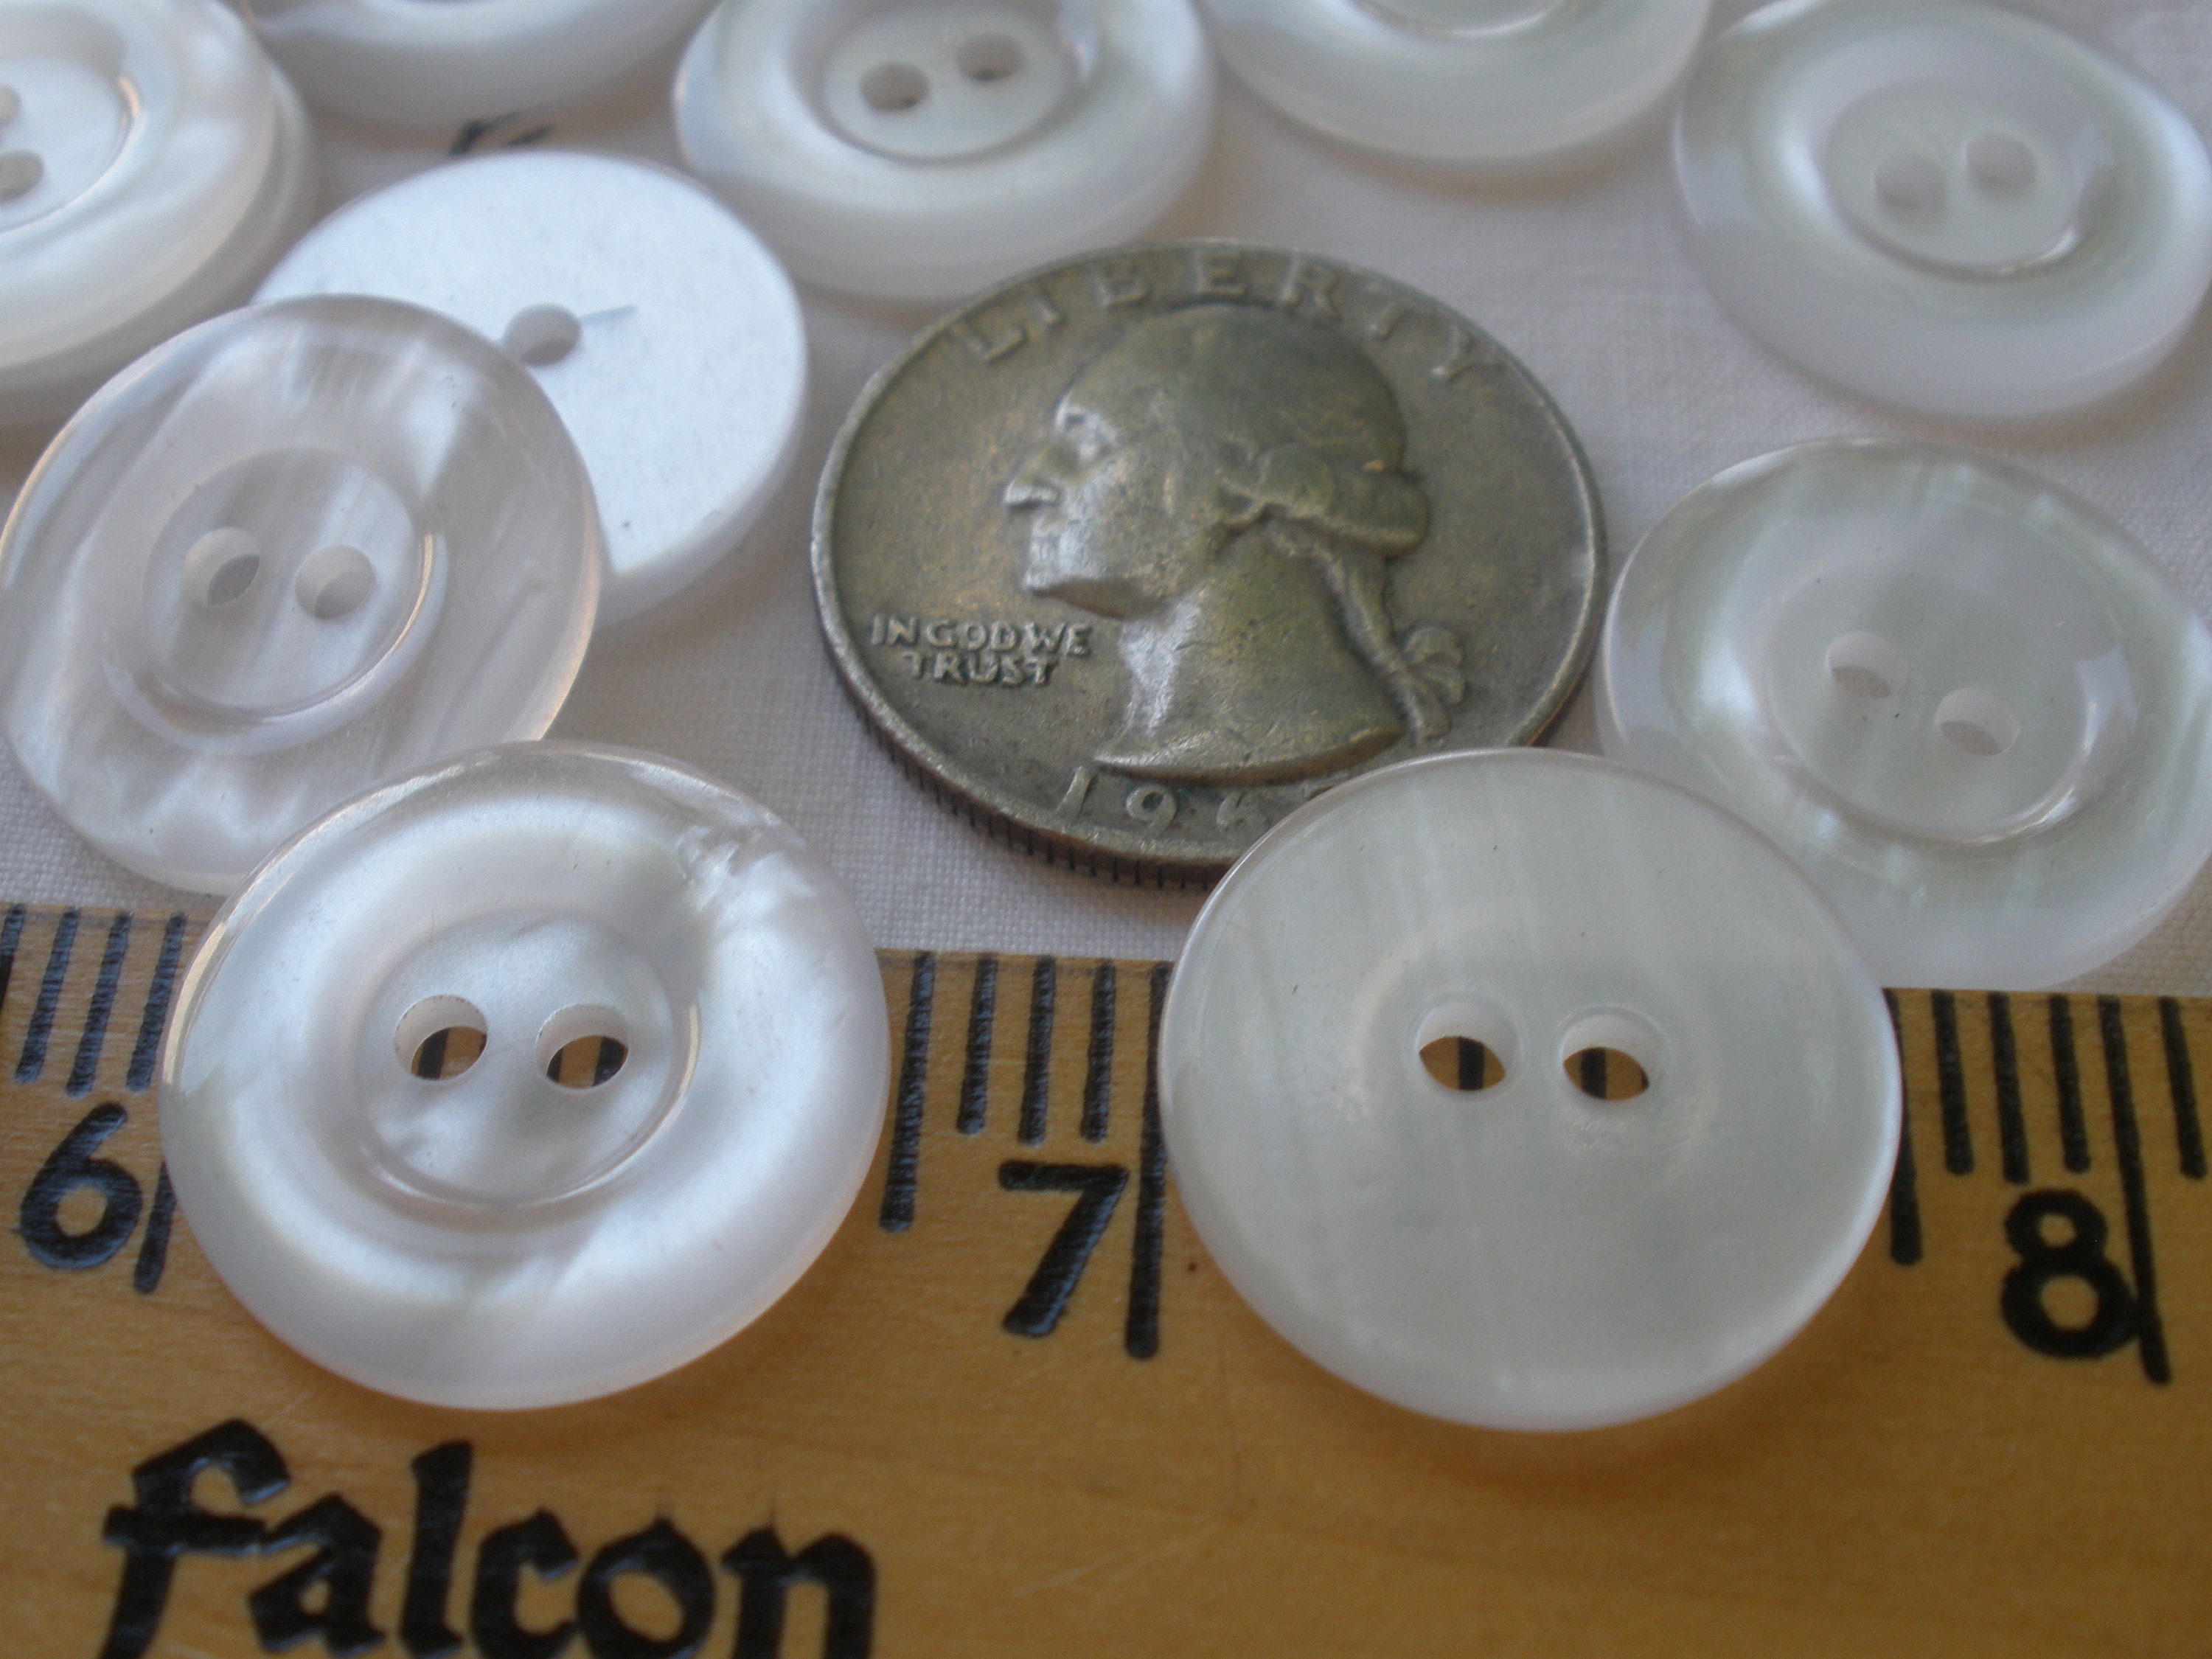 Classic Frost White Buttons 3/4 30L 19MM 24 Each With Rim Face 4 Hole Sew  on Sewing Crafts Flat Back Cool Vintage Buttons 